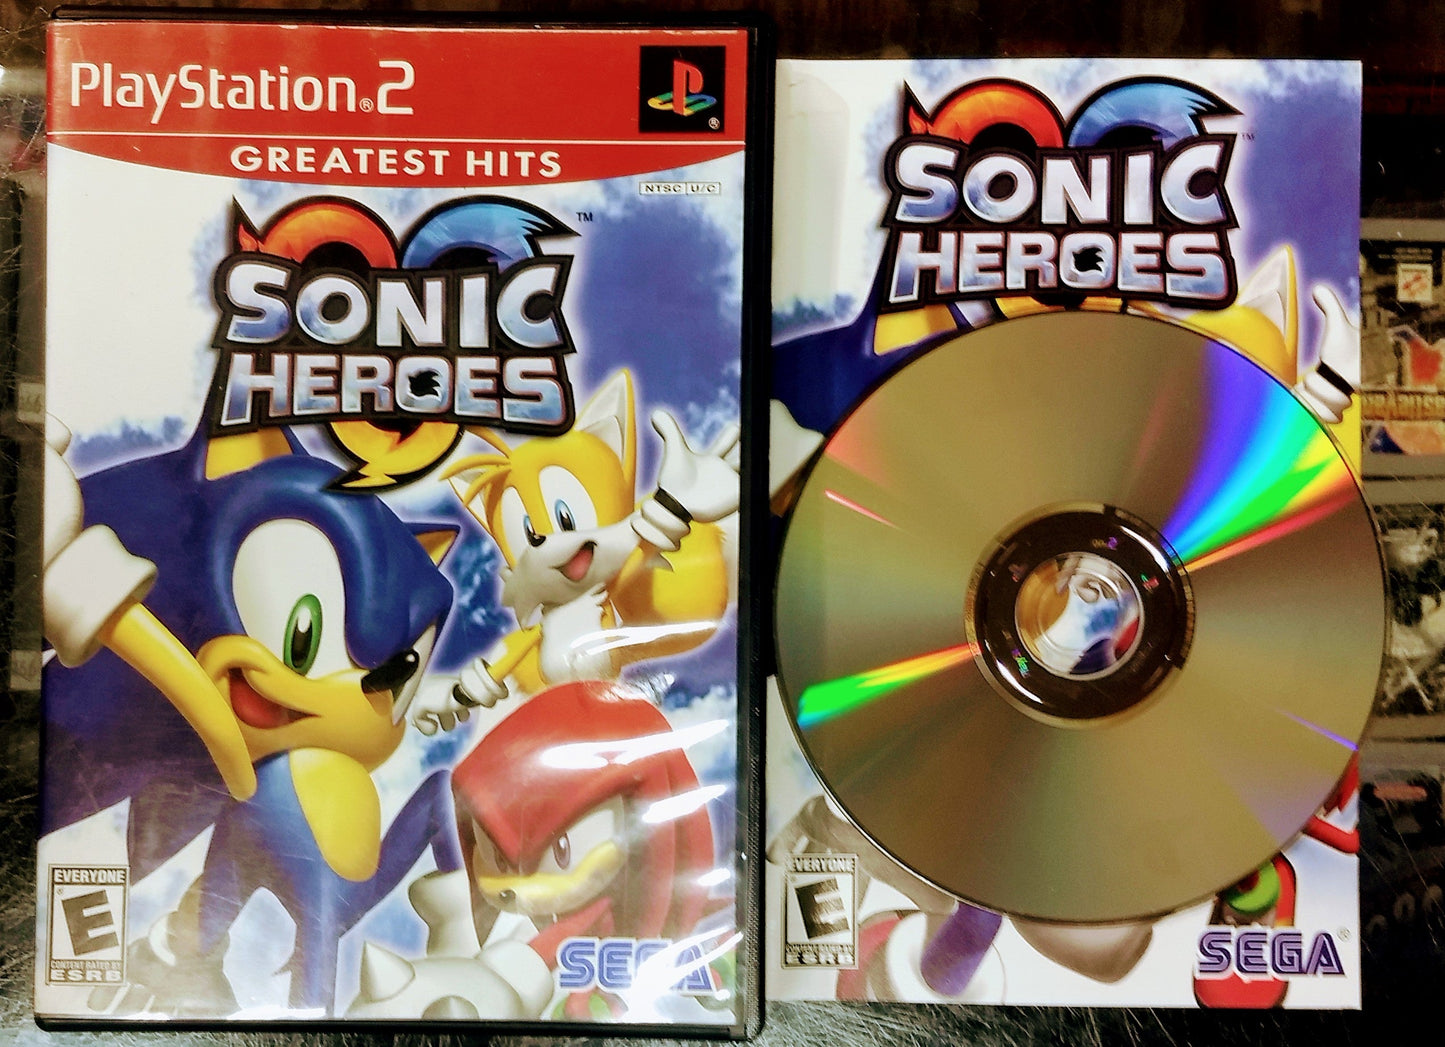 SONIC HEROES GREATEST HITS (PLAYSTATION 2 PS2) - jeux video game-x